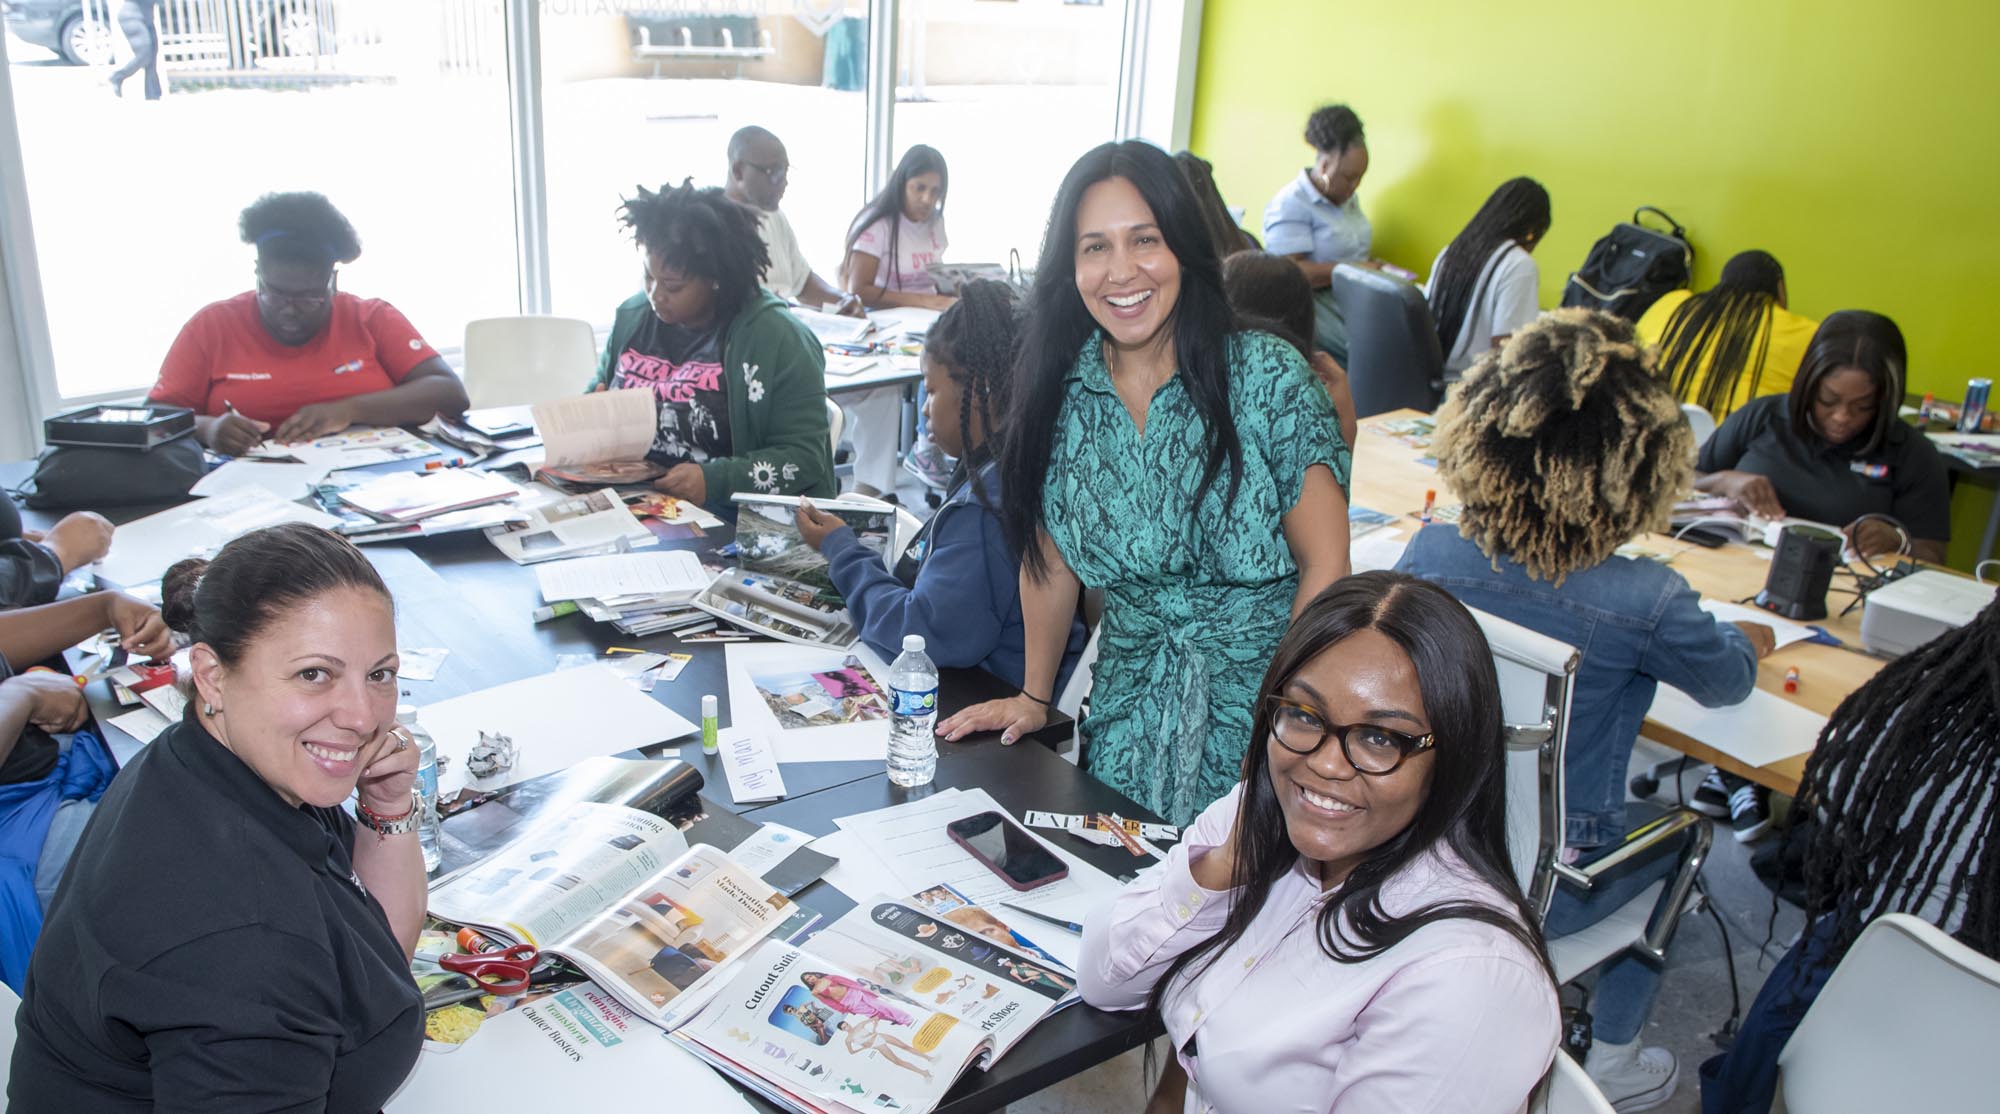 Hosted at the Center for Black Innovation, staff from OYC and Honey Shine learned about the power of visualizing your success and manifesting your goals. During the workshop participants found items that represented their future and created a visualization board with them.